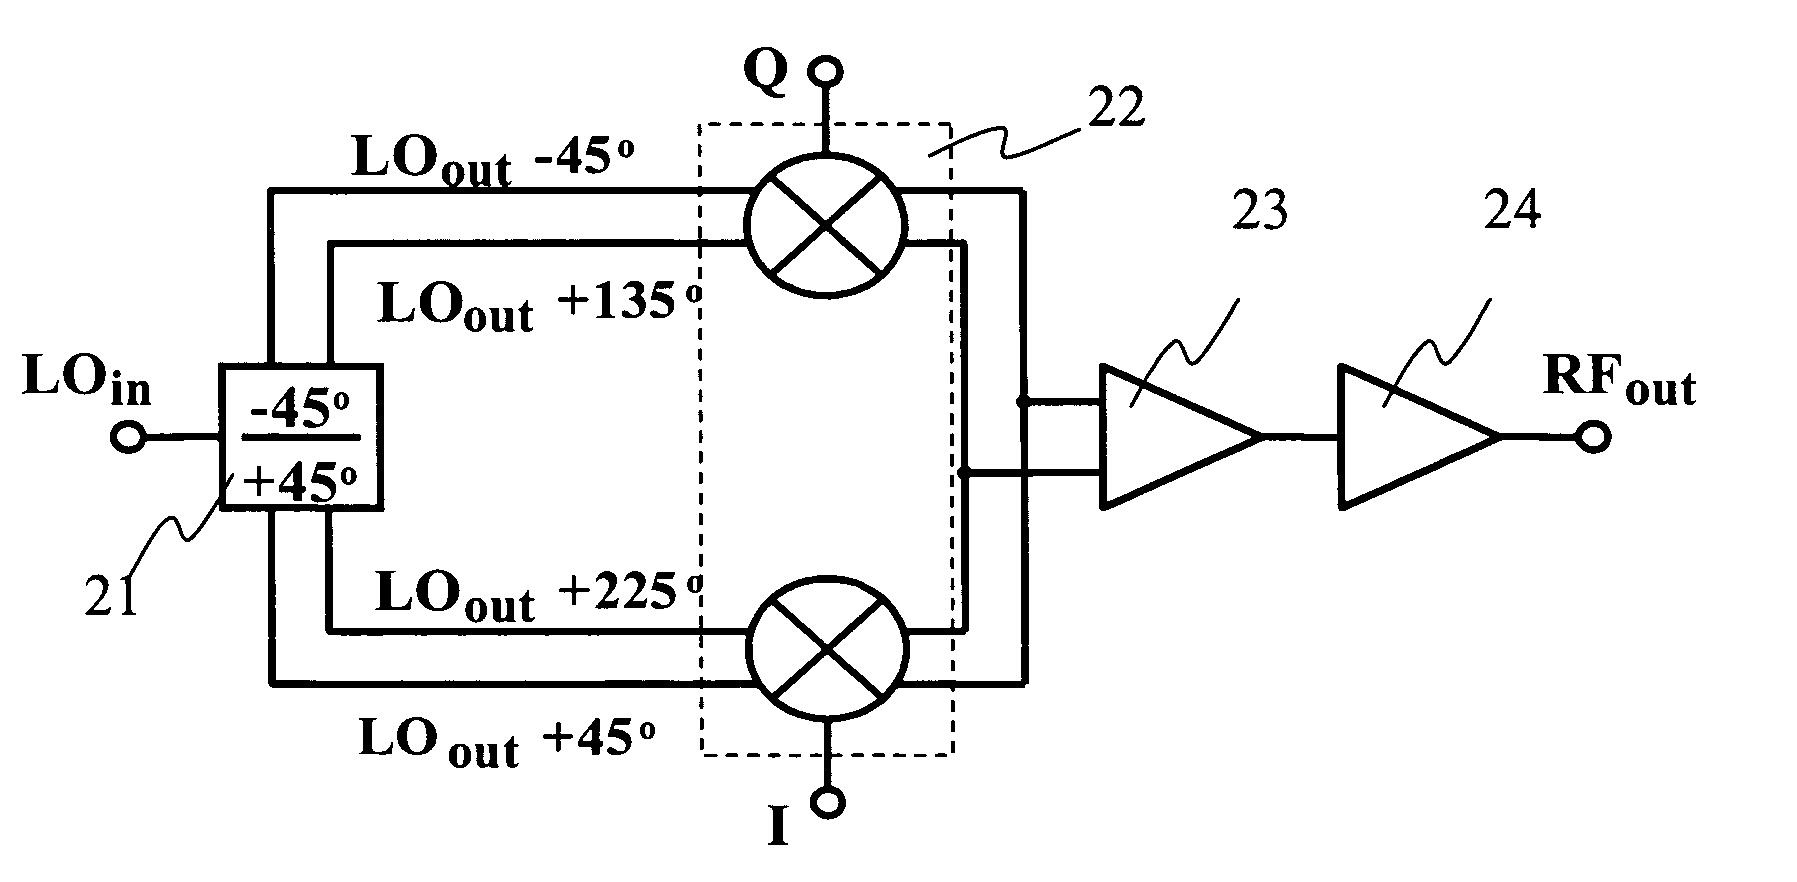 Active 90-degree phase shifter with LC-type emitter degeneration and quadrature modulator IC using the same